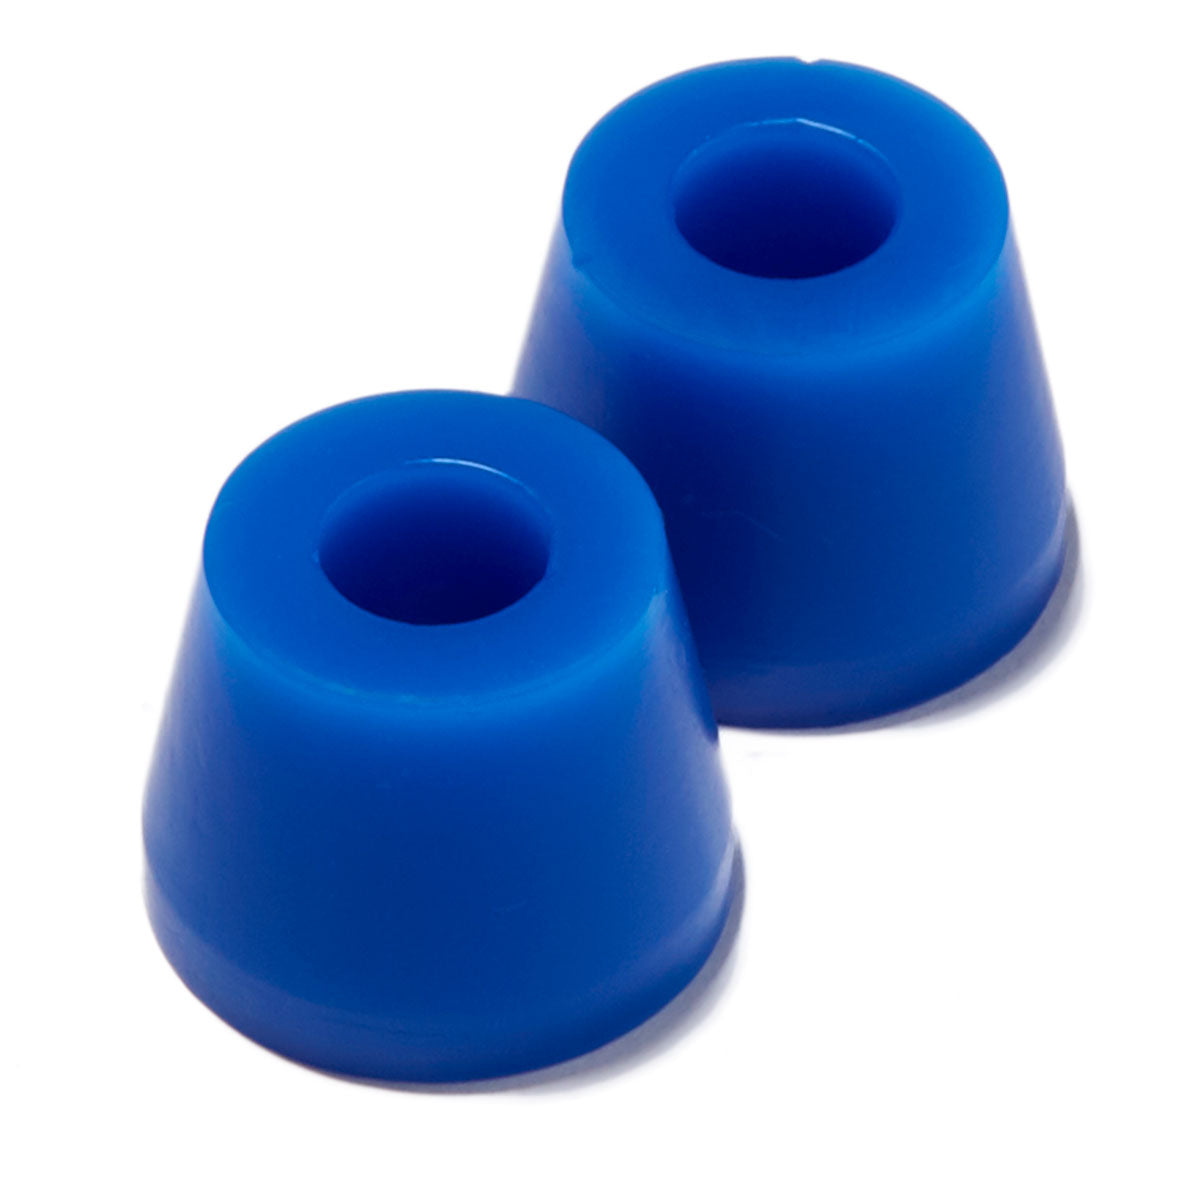 RipTide Tall Cone Bushings - APS 85a image 1